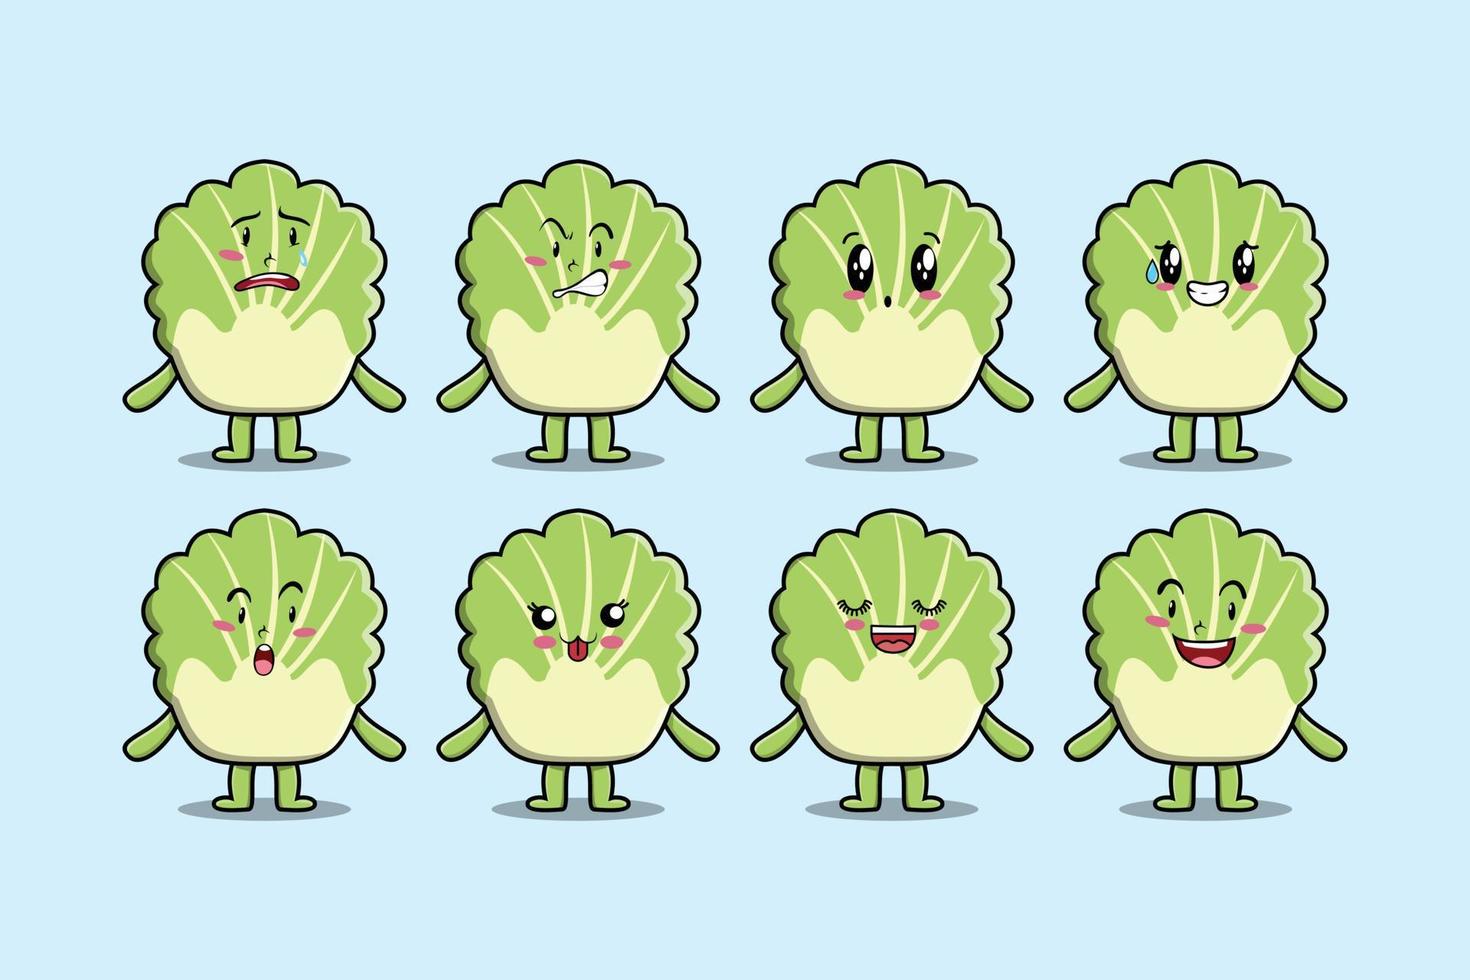 Set chinese cabbage cartoon different expression vector